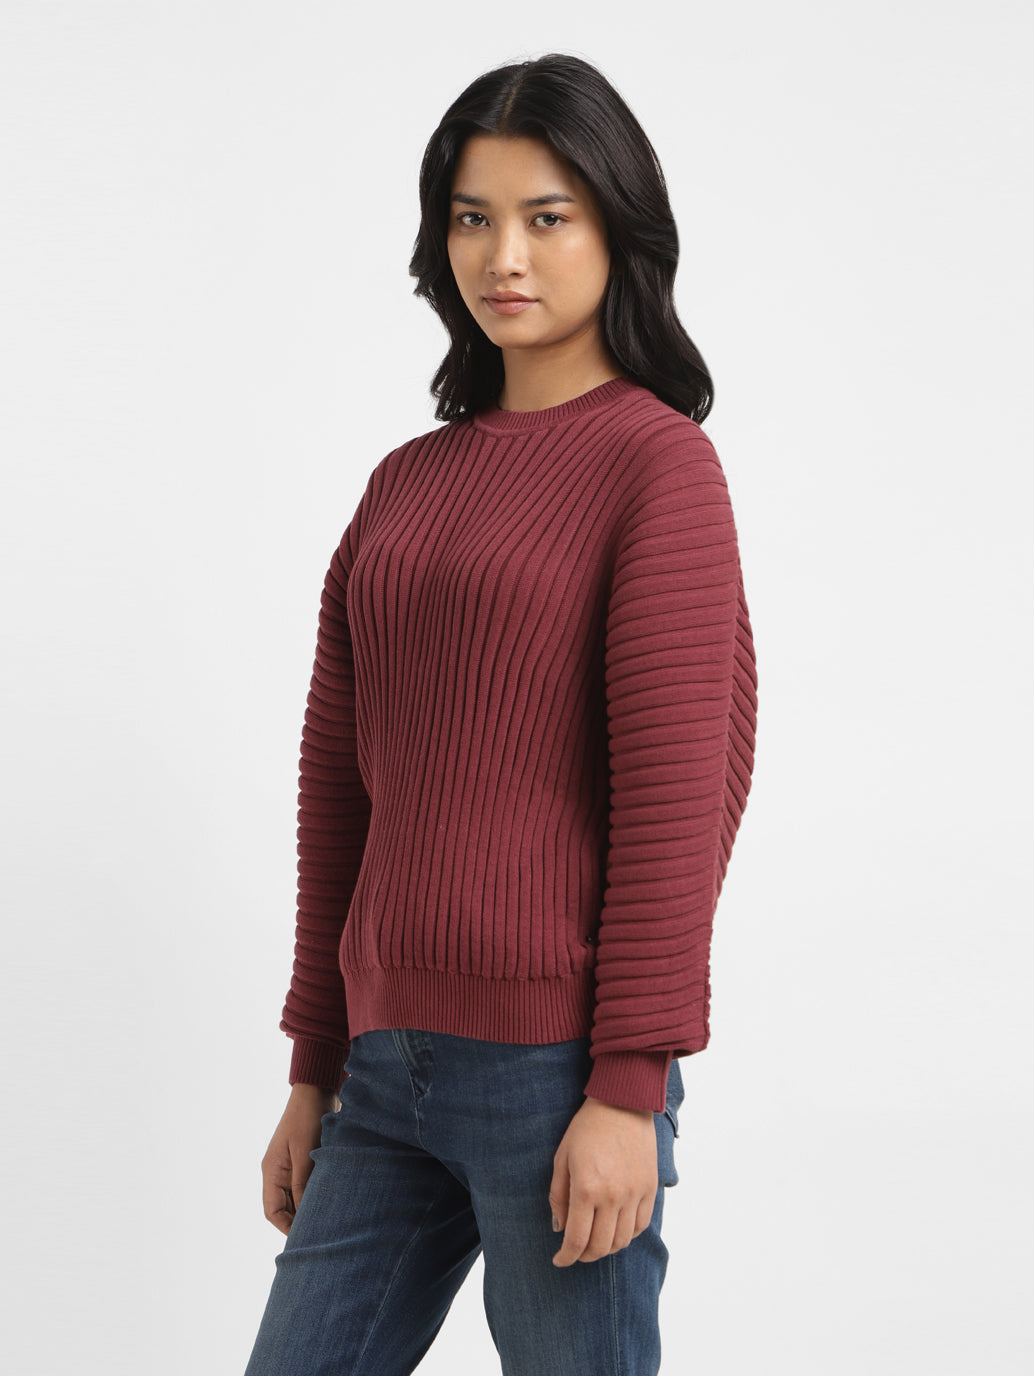 New Look ribbed crew neck sweater in burgundy